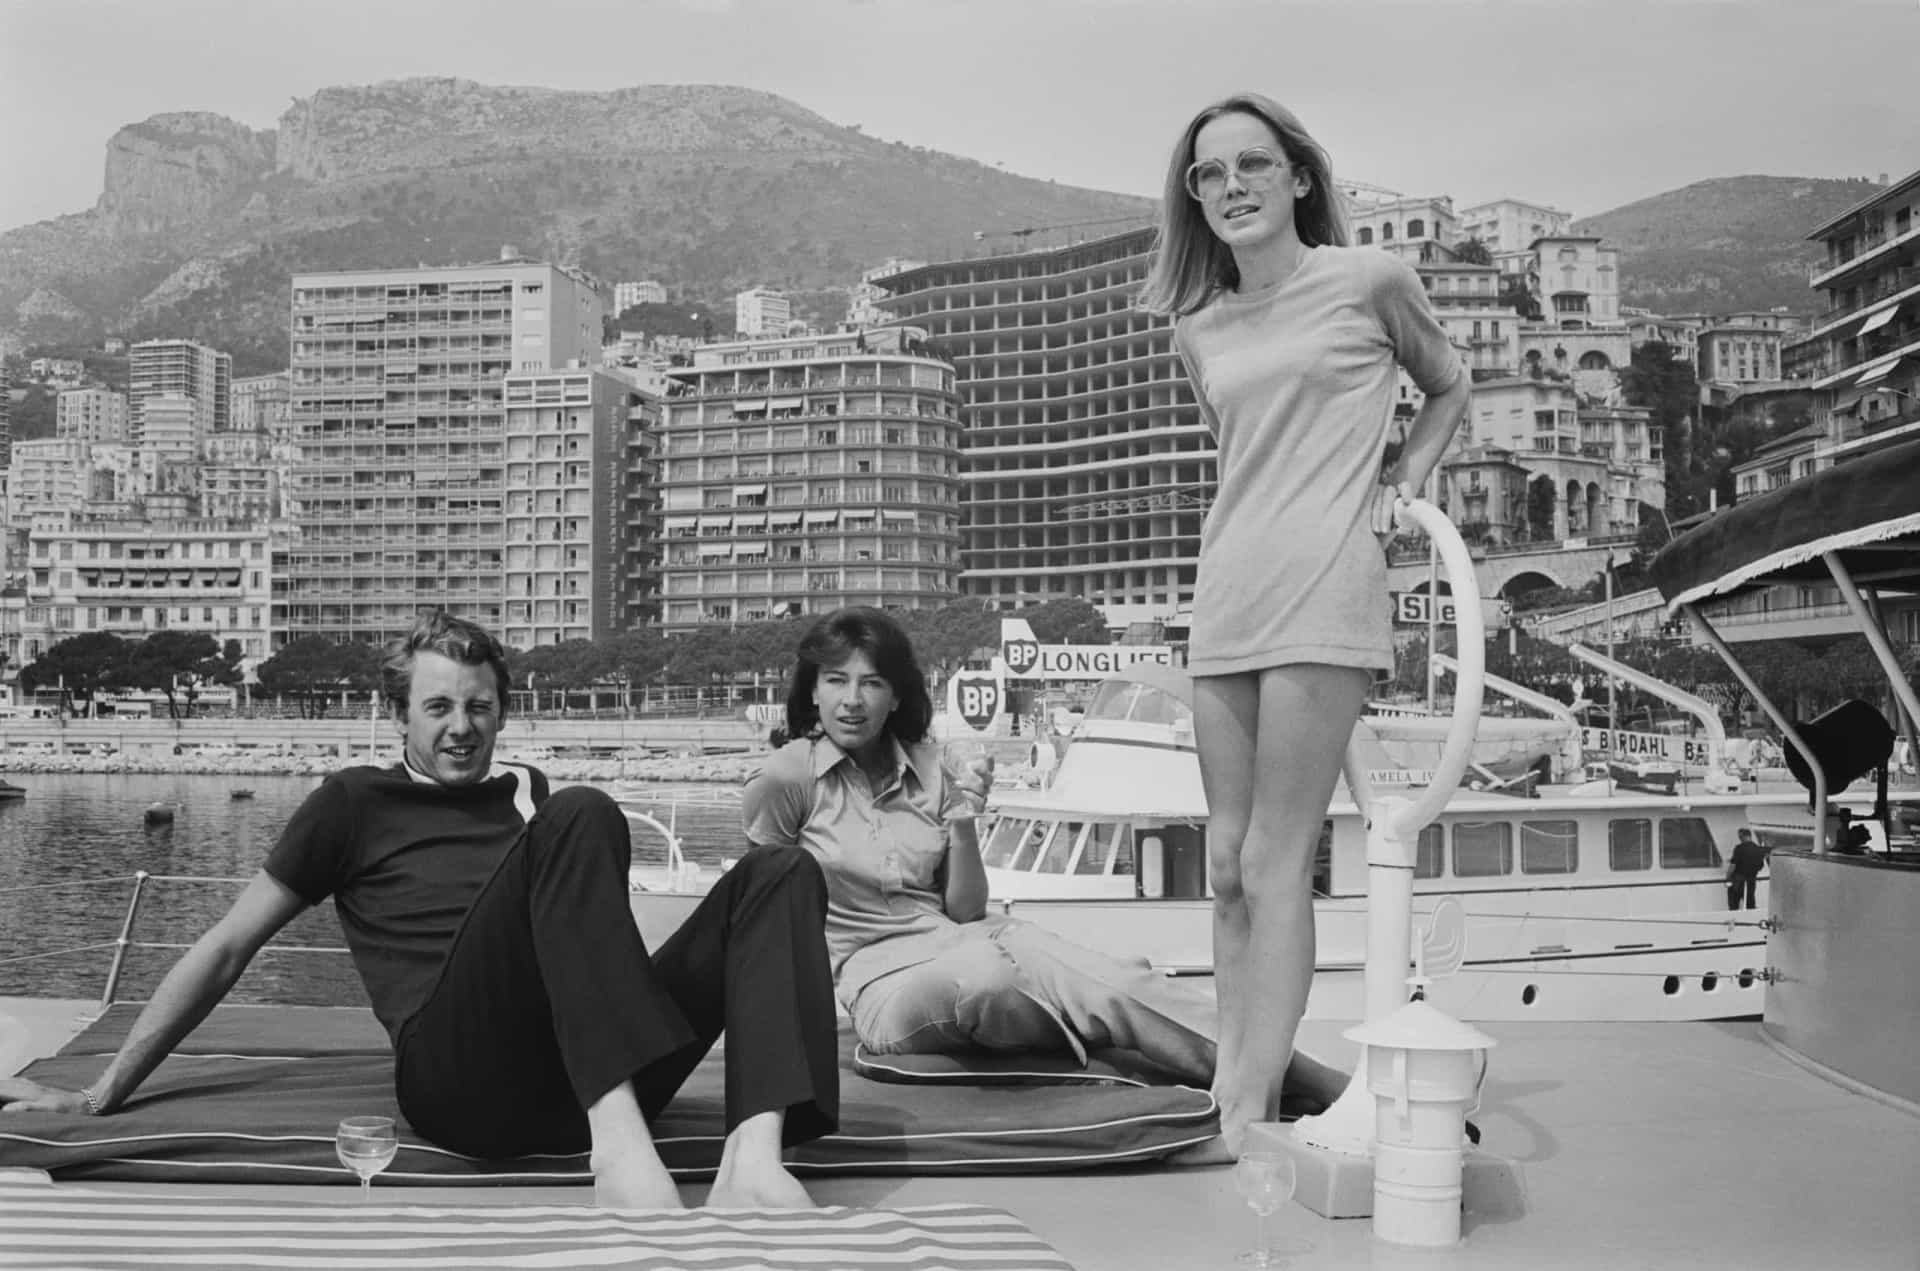 <p>The 1968 Monaco Grand Prix might have been one of the main reasons why visitors flocked to the Principality of Monaco, but surely yacht lovers also had a great time there. </p>